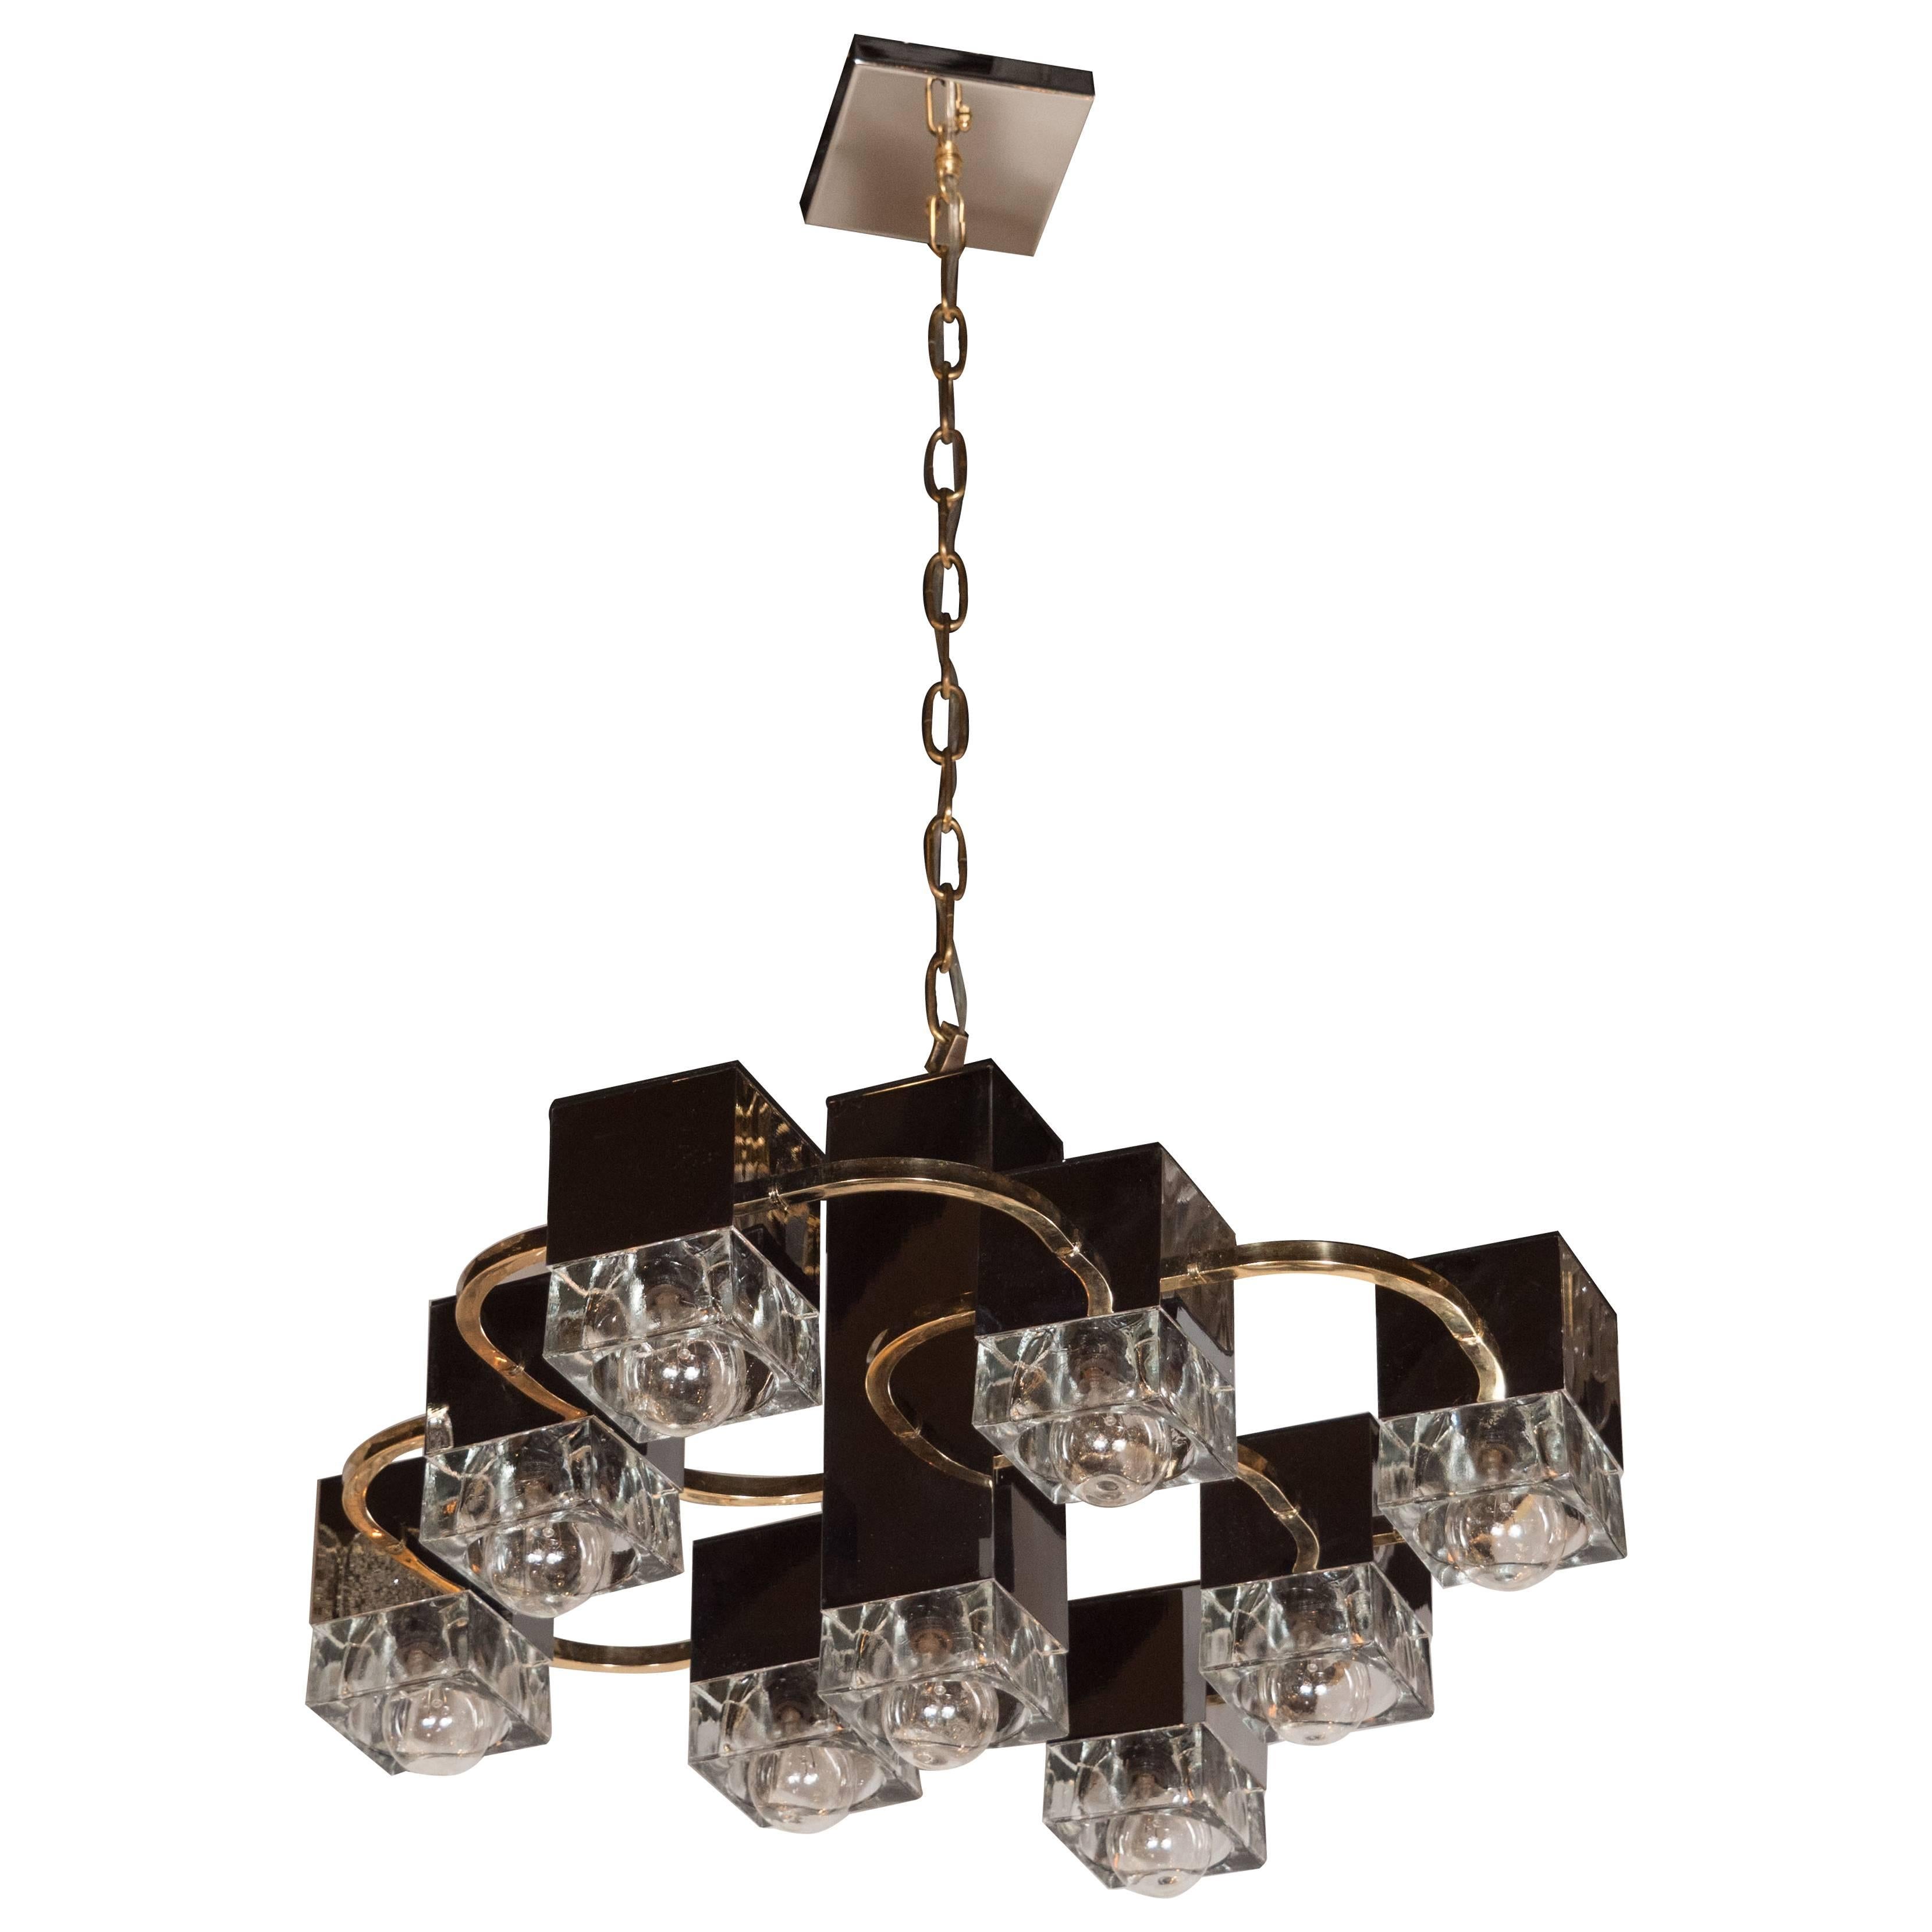 Mid-Century Sciolari Chandelier with Waterglass Cubes, Chrome and Brass